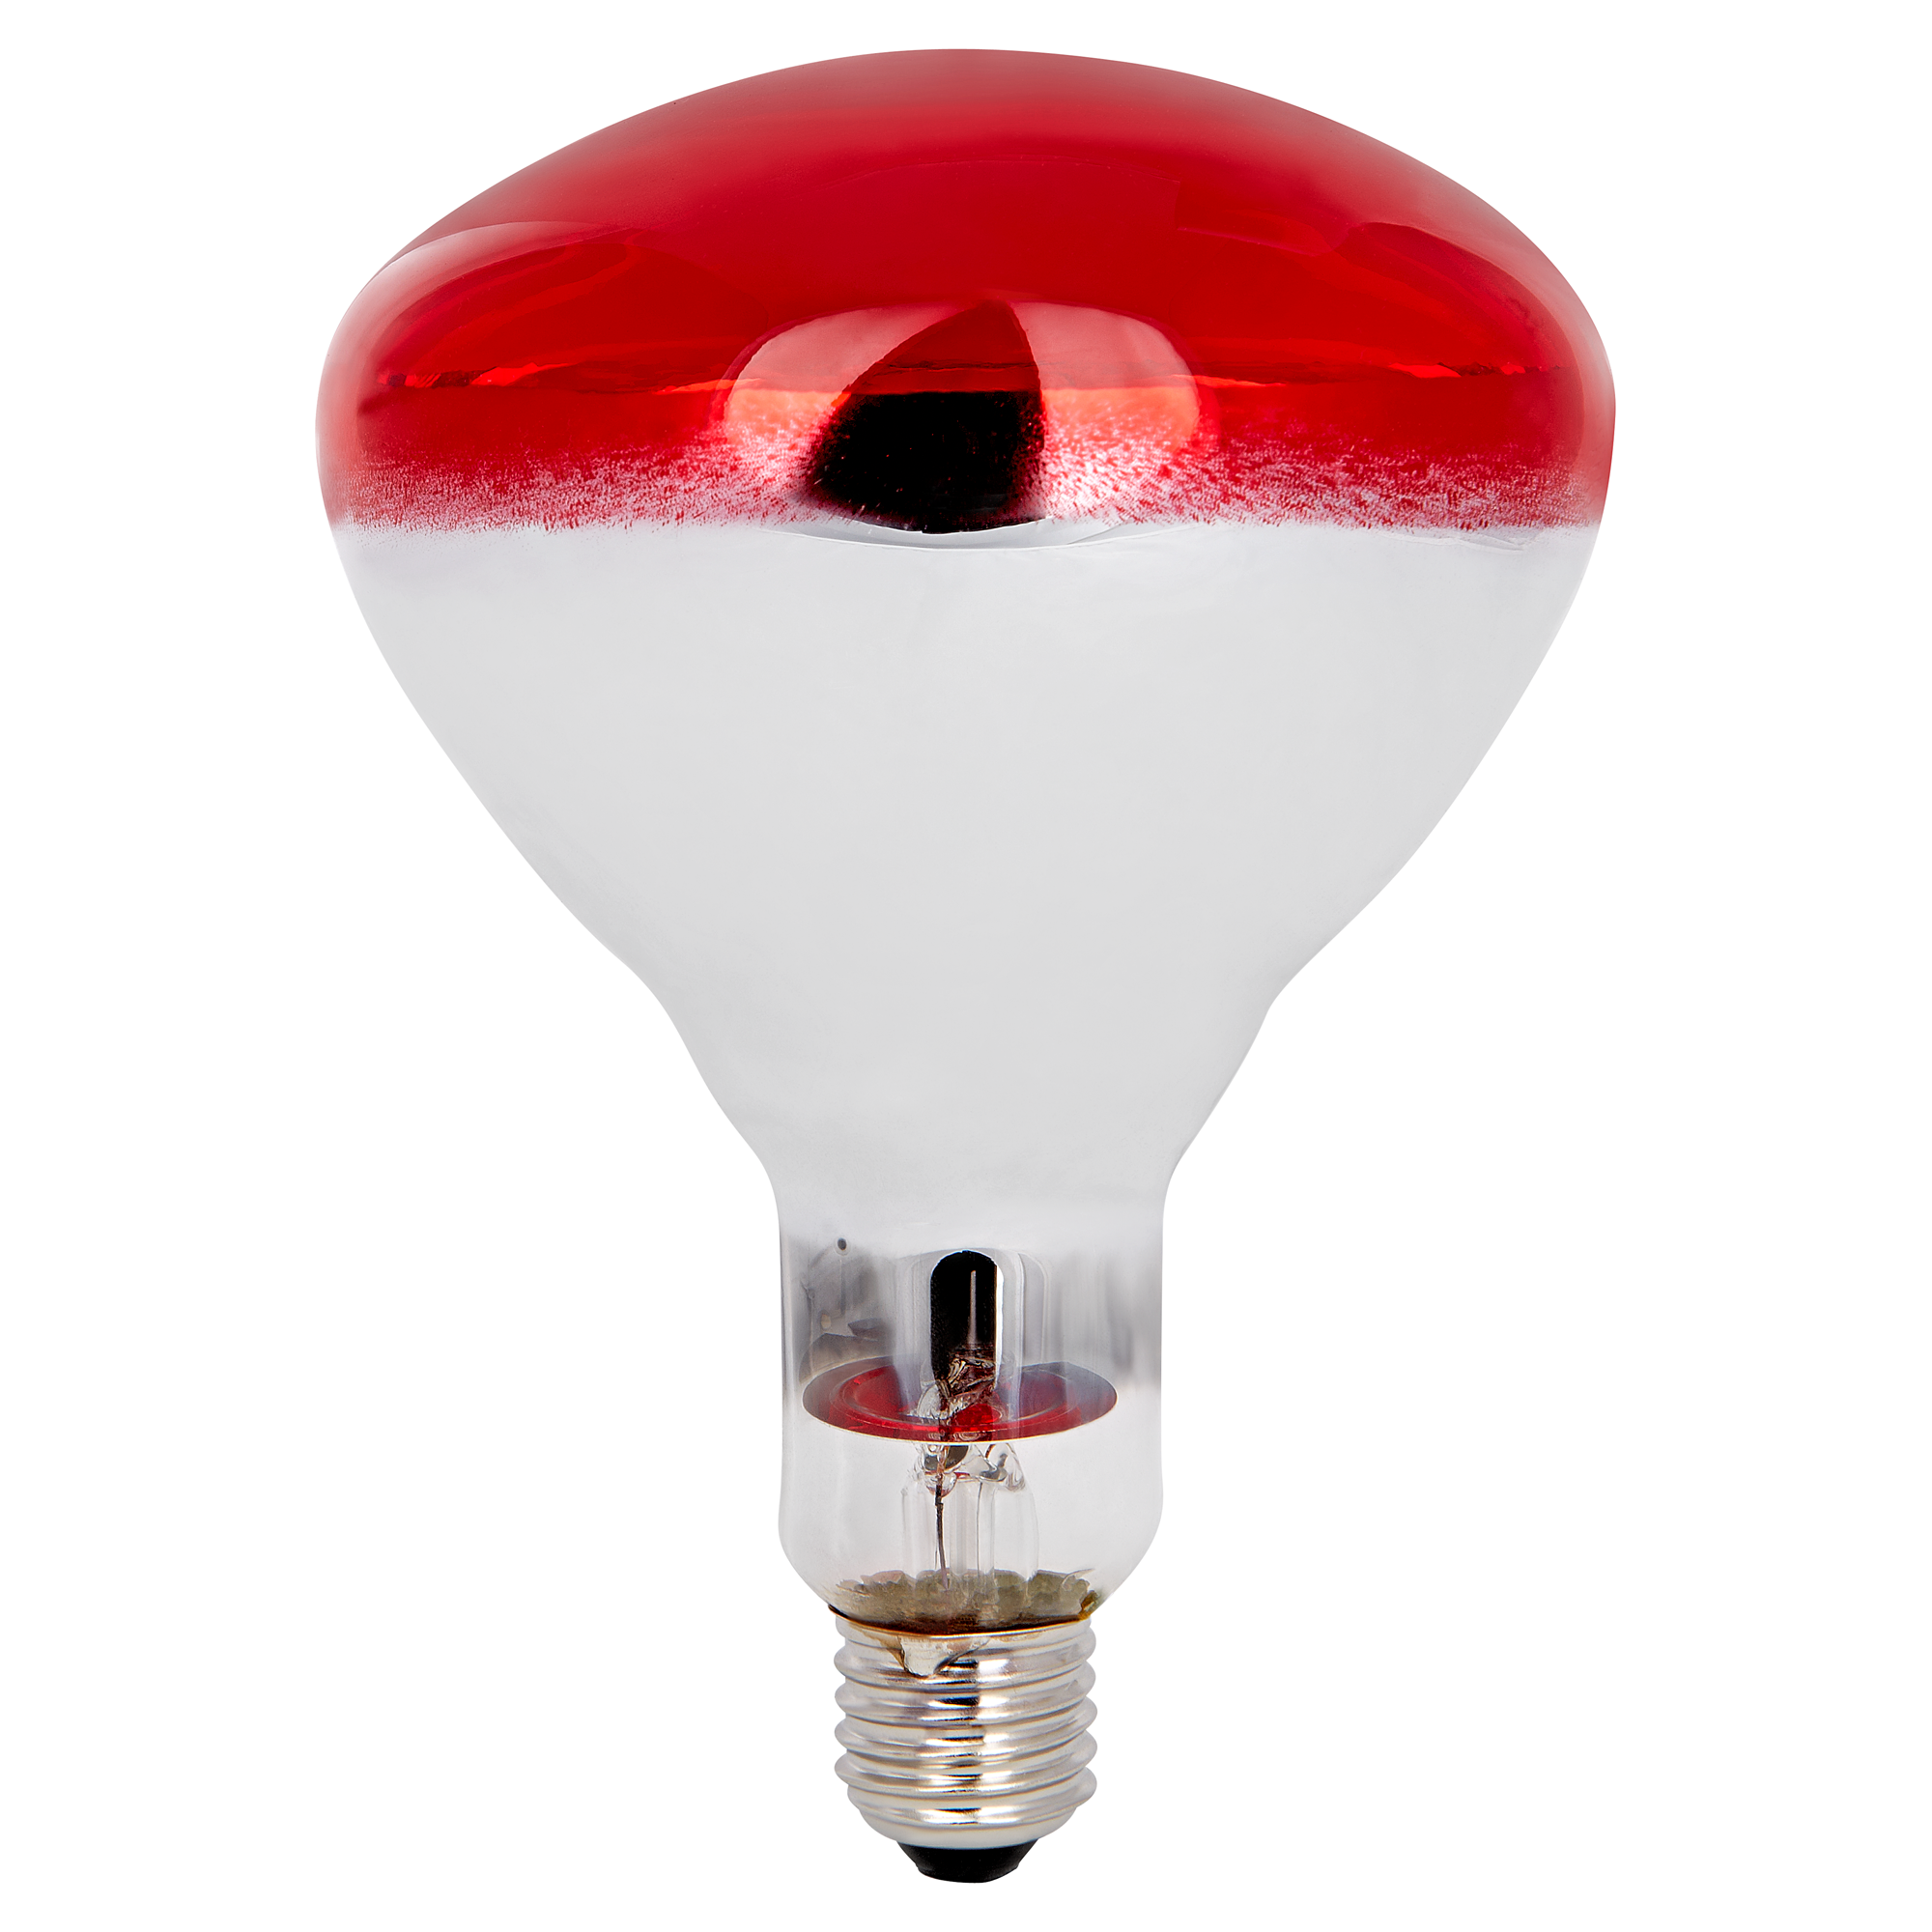 Infrarot-Lampe E27 150 W + product picture